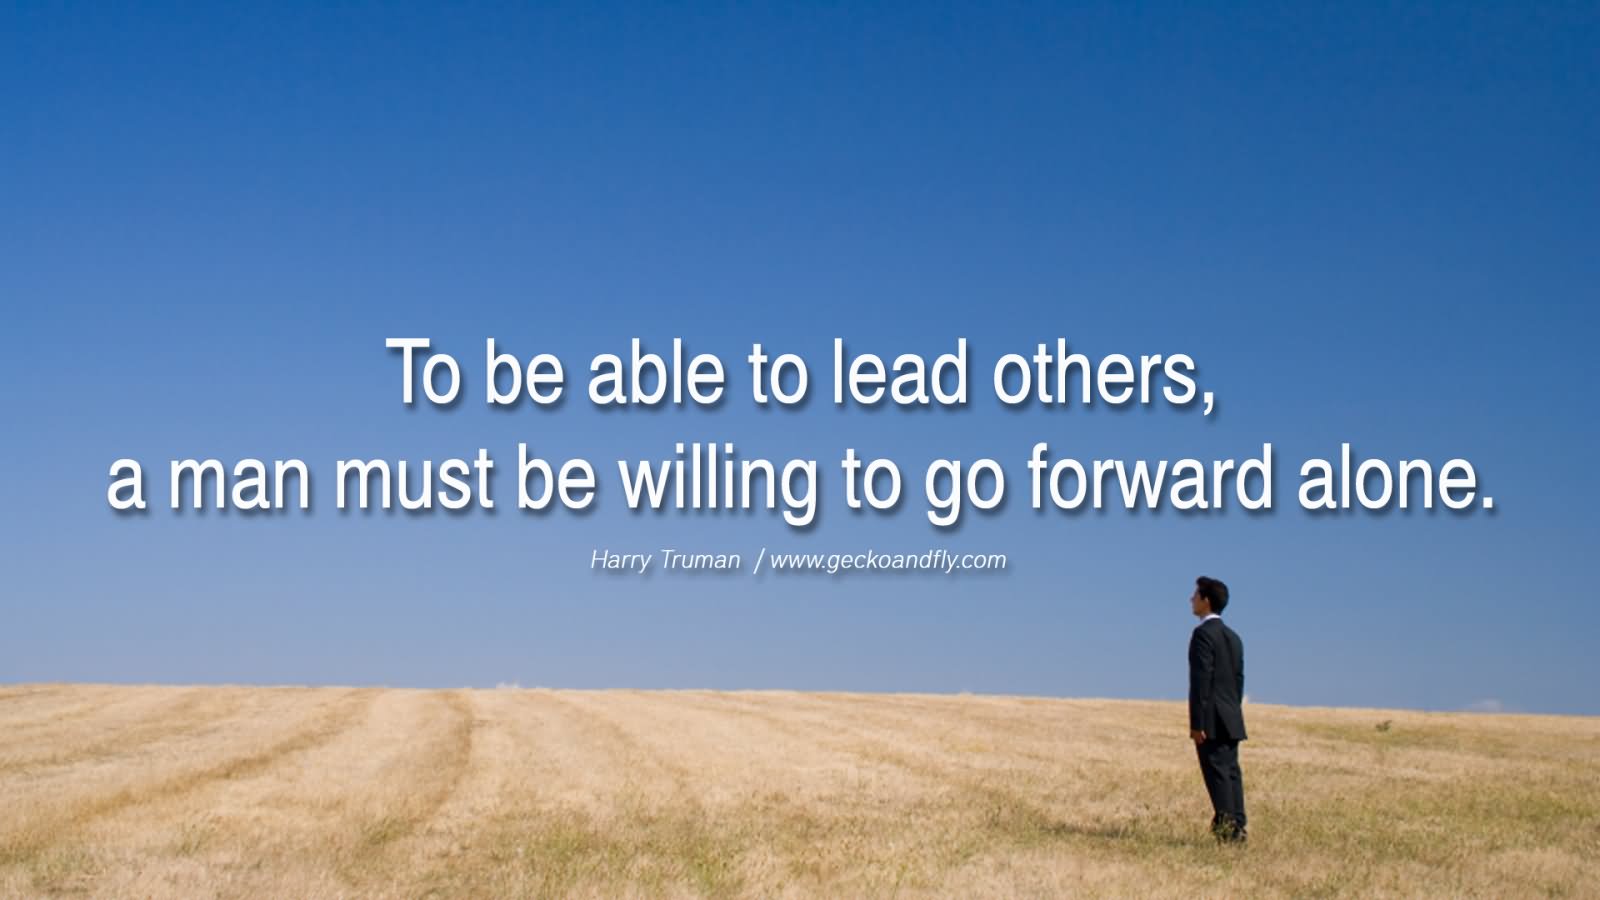 To be able to lead others, a man must be willing to go forward alone.  -Harry Truman